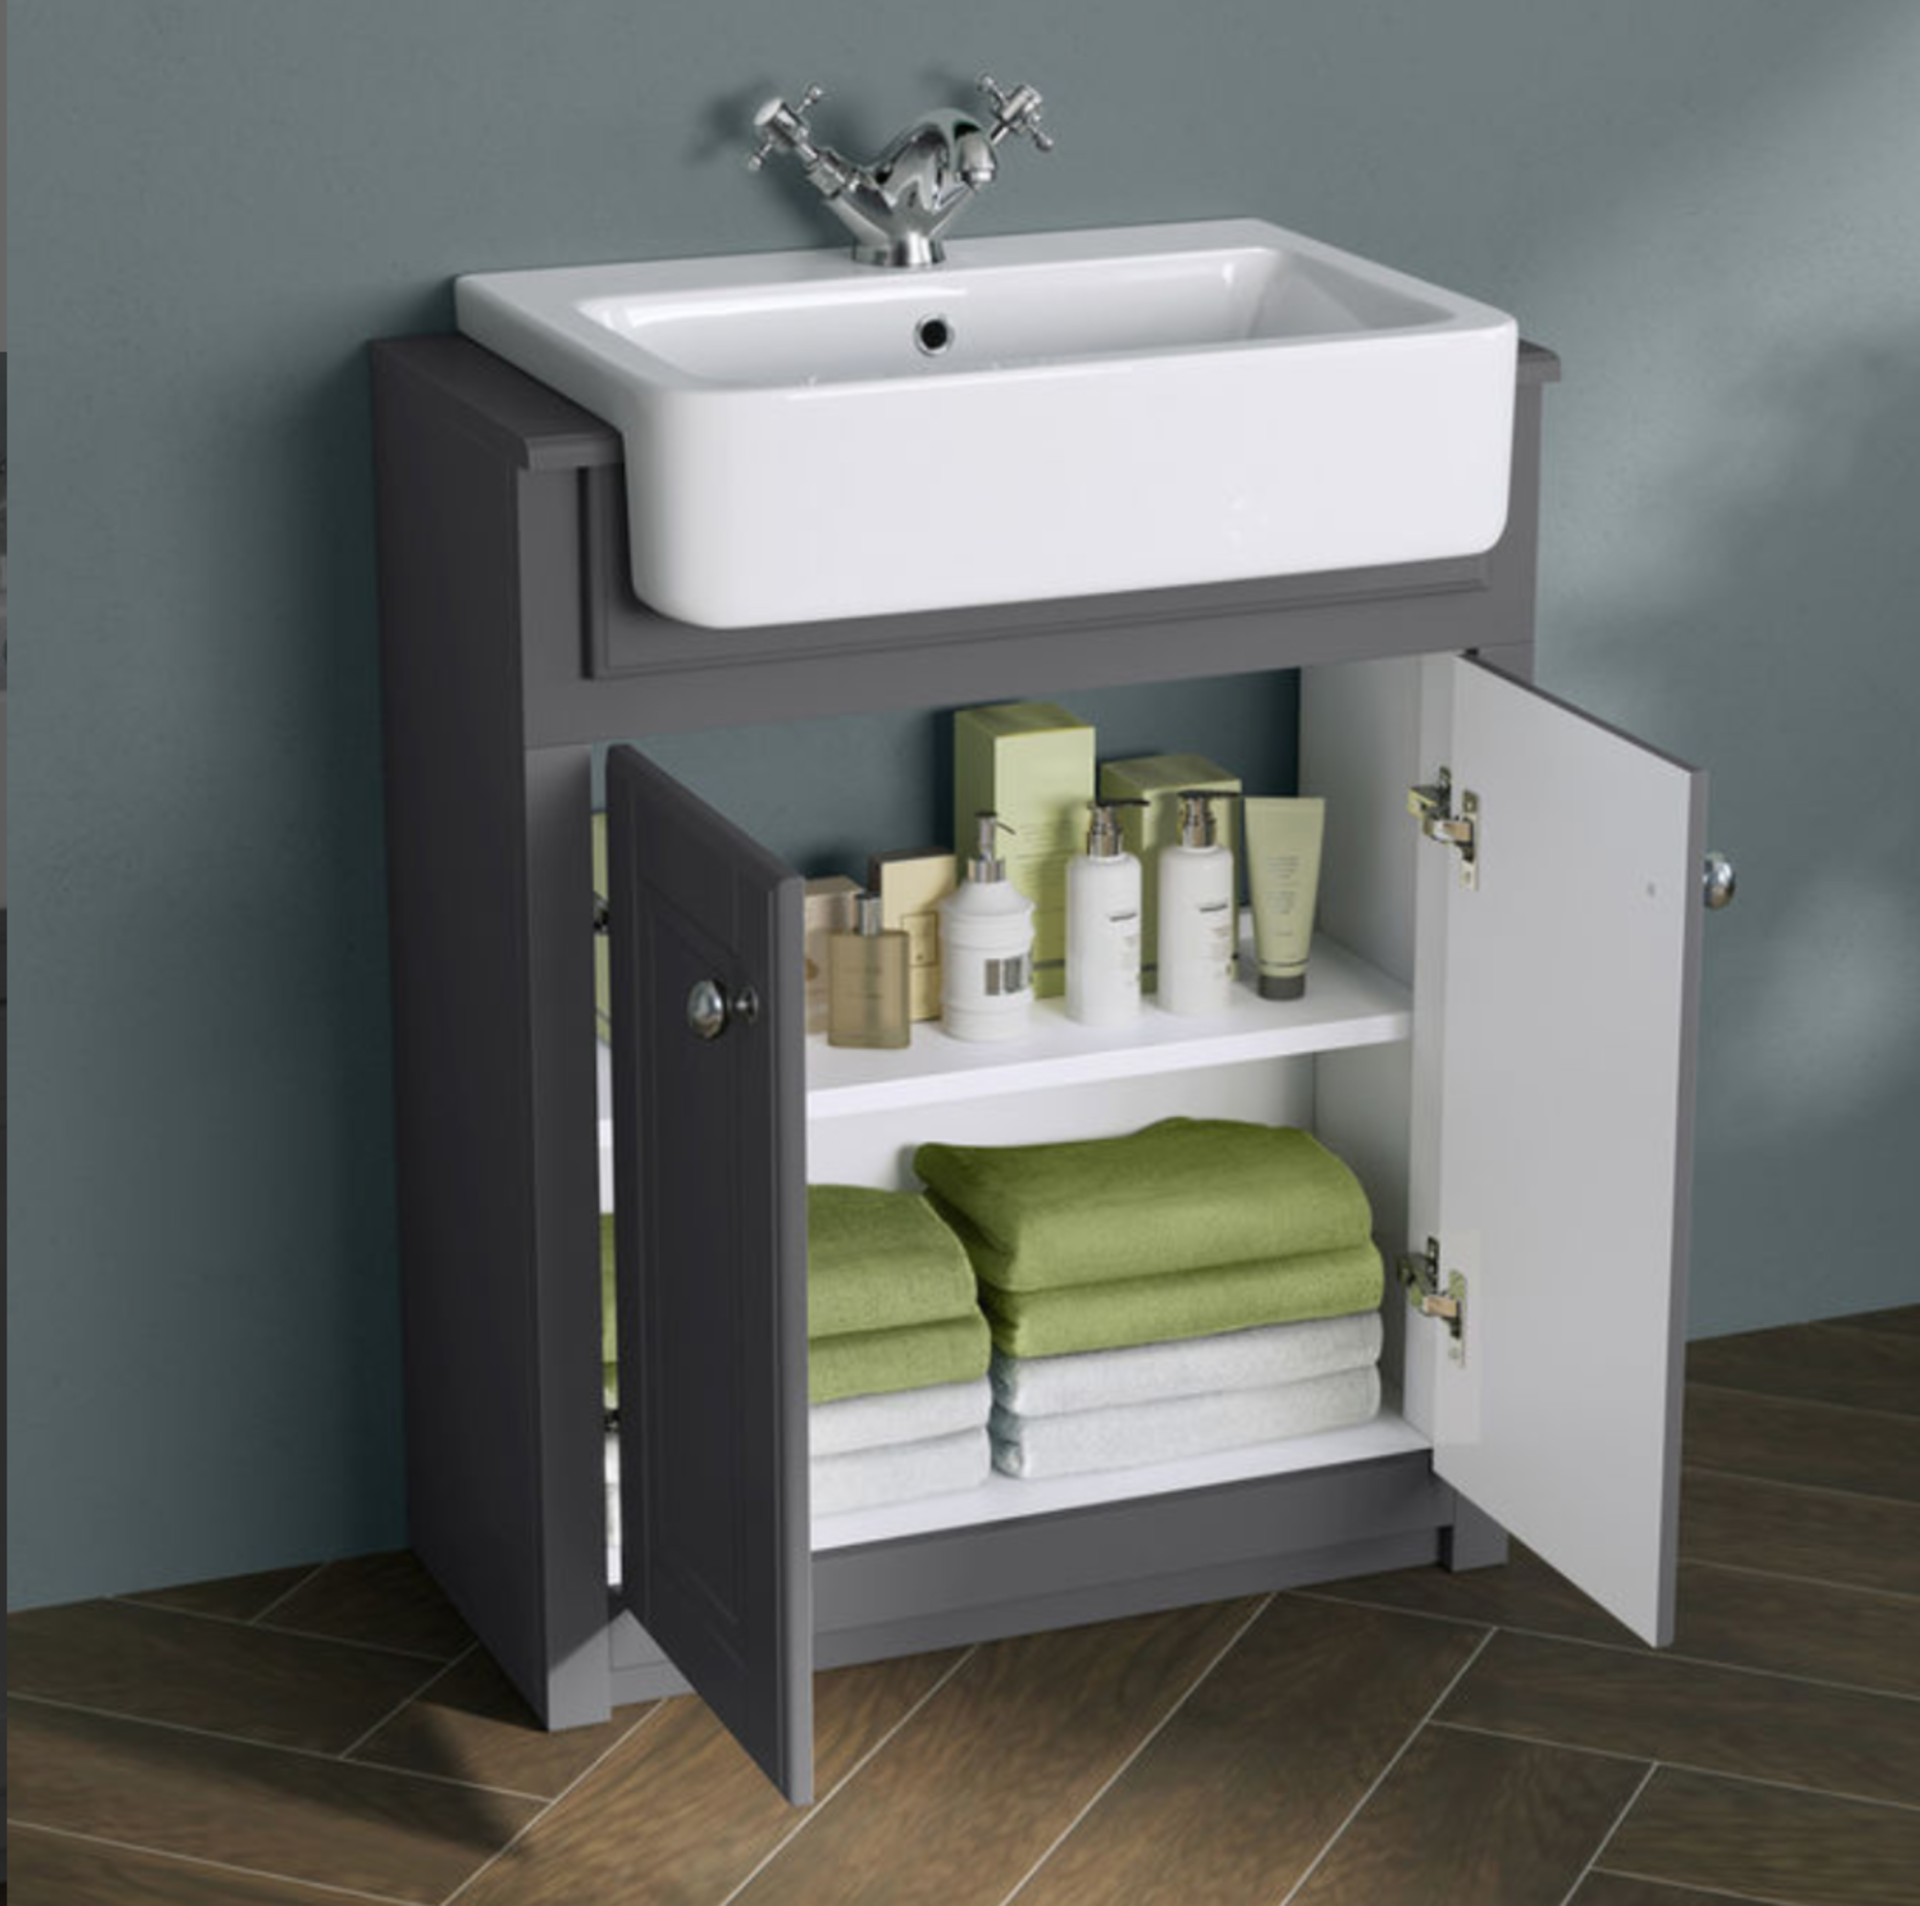 NEW & BOXED 667mm Midnight Grey FloorStanding Sink Vanity Unit. RRP £749.99.Comes complete wi... - Image 3 of 4